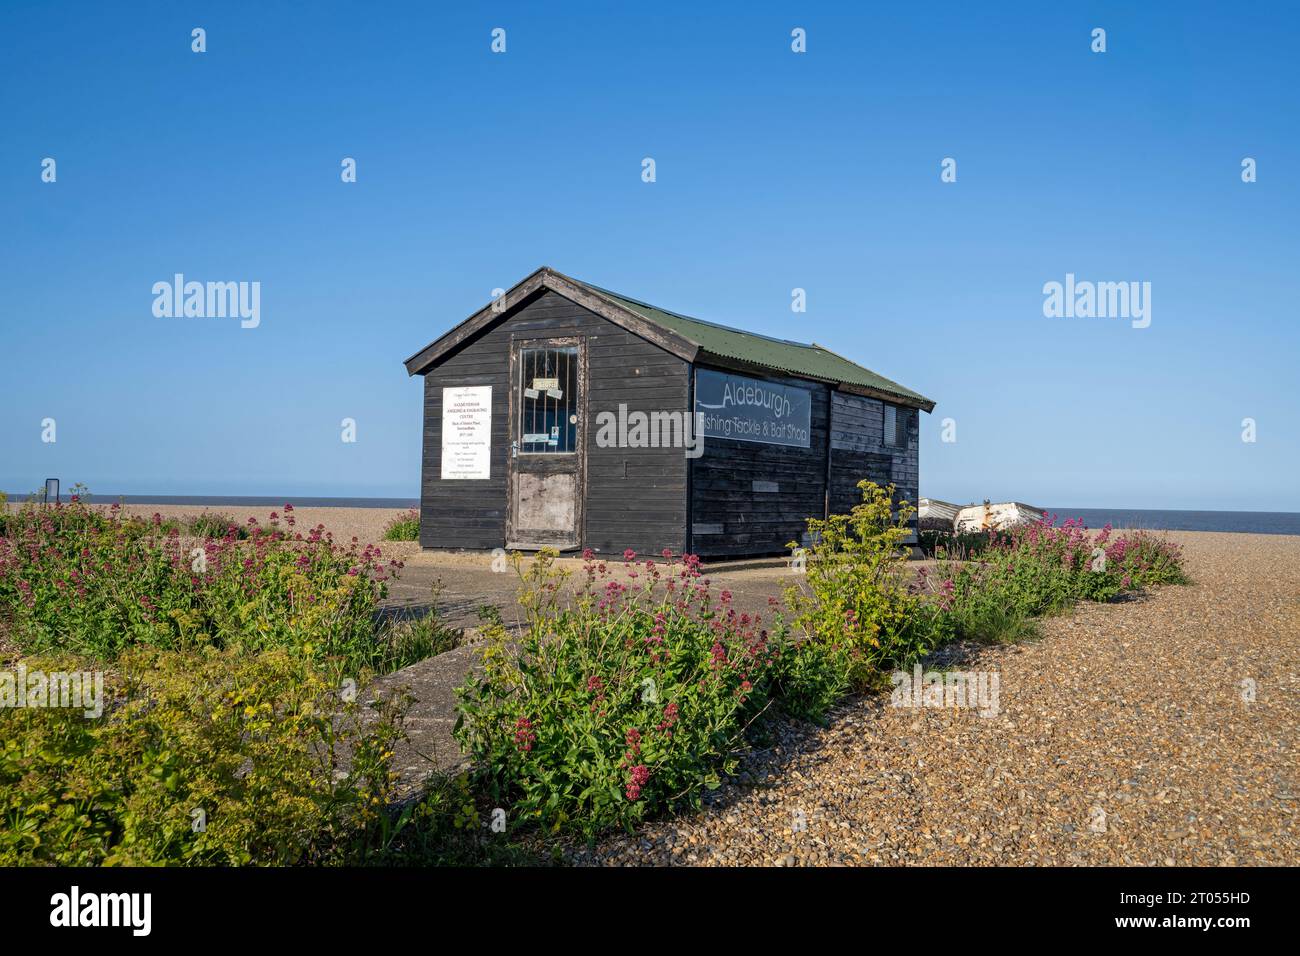 Fishing tackle and bait shop Stock Photo - Alamy